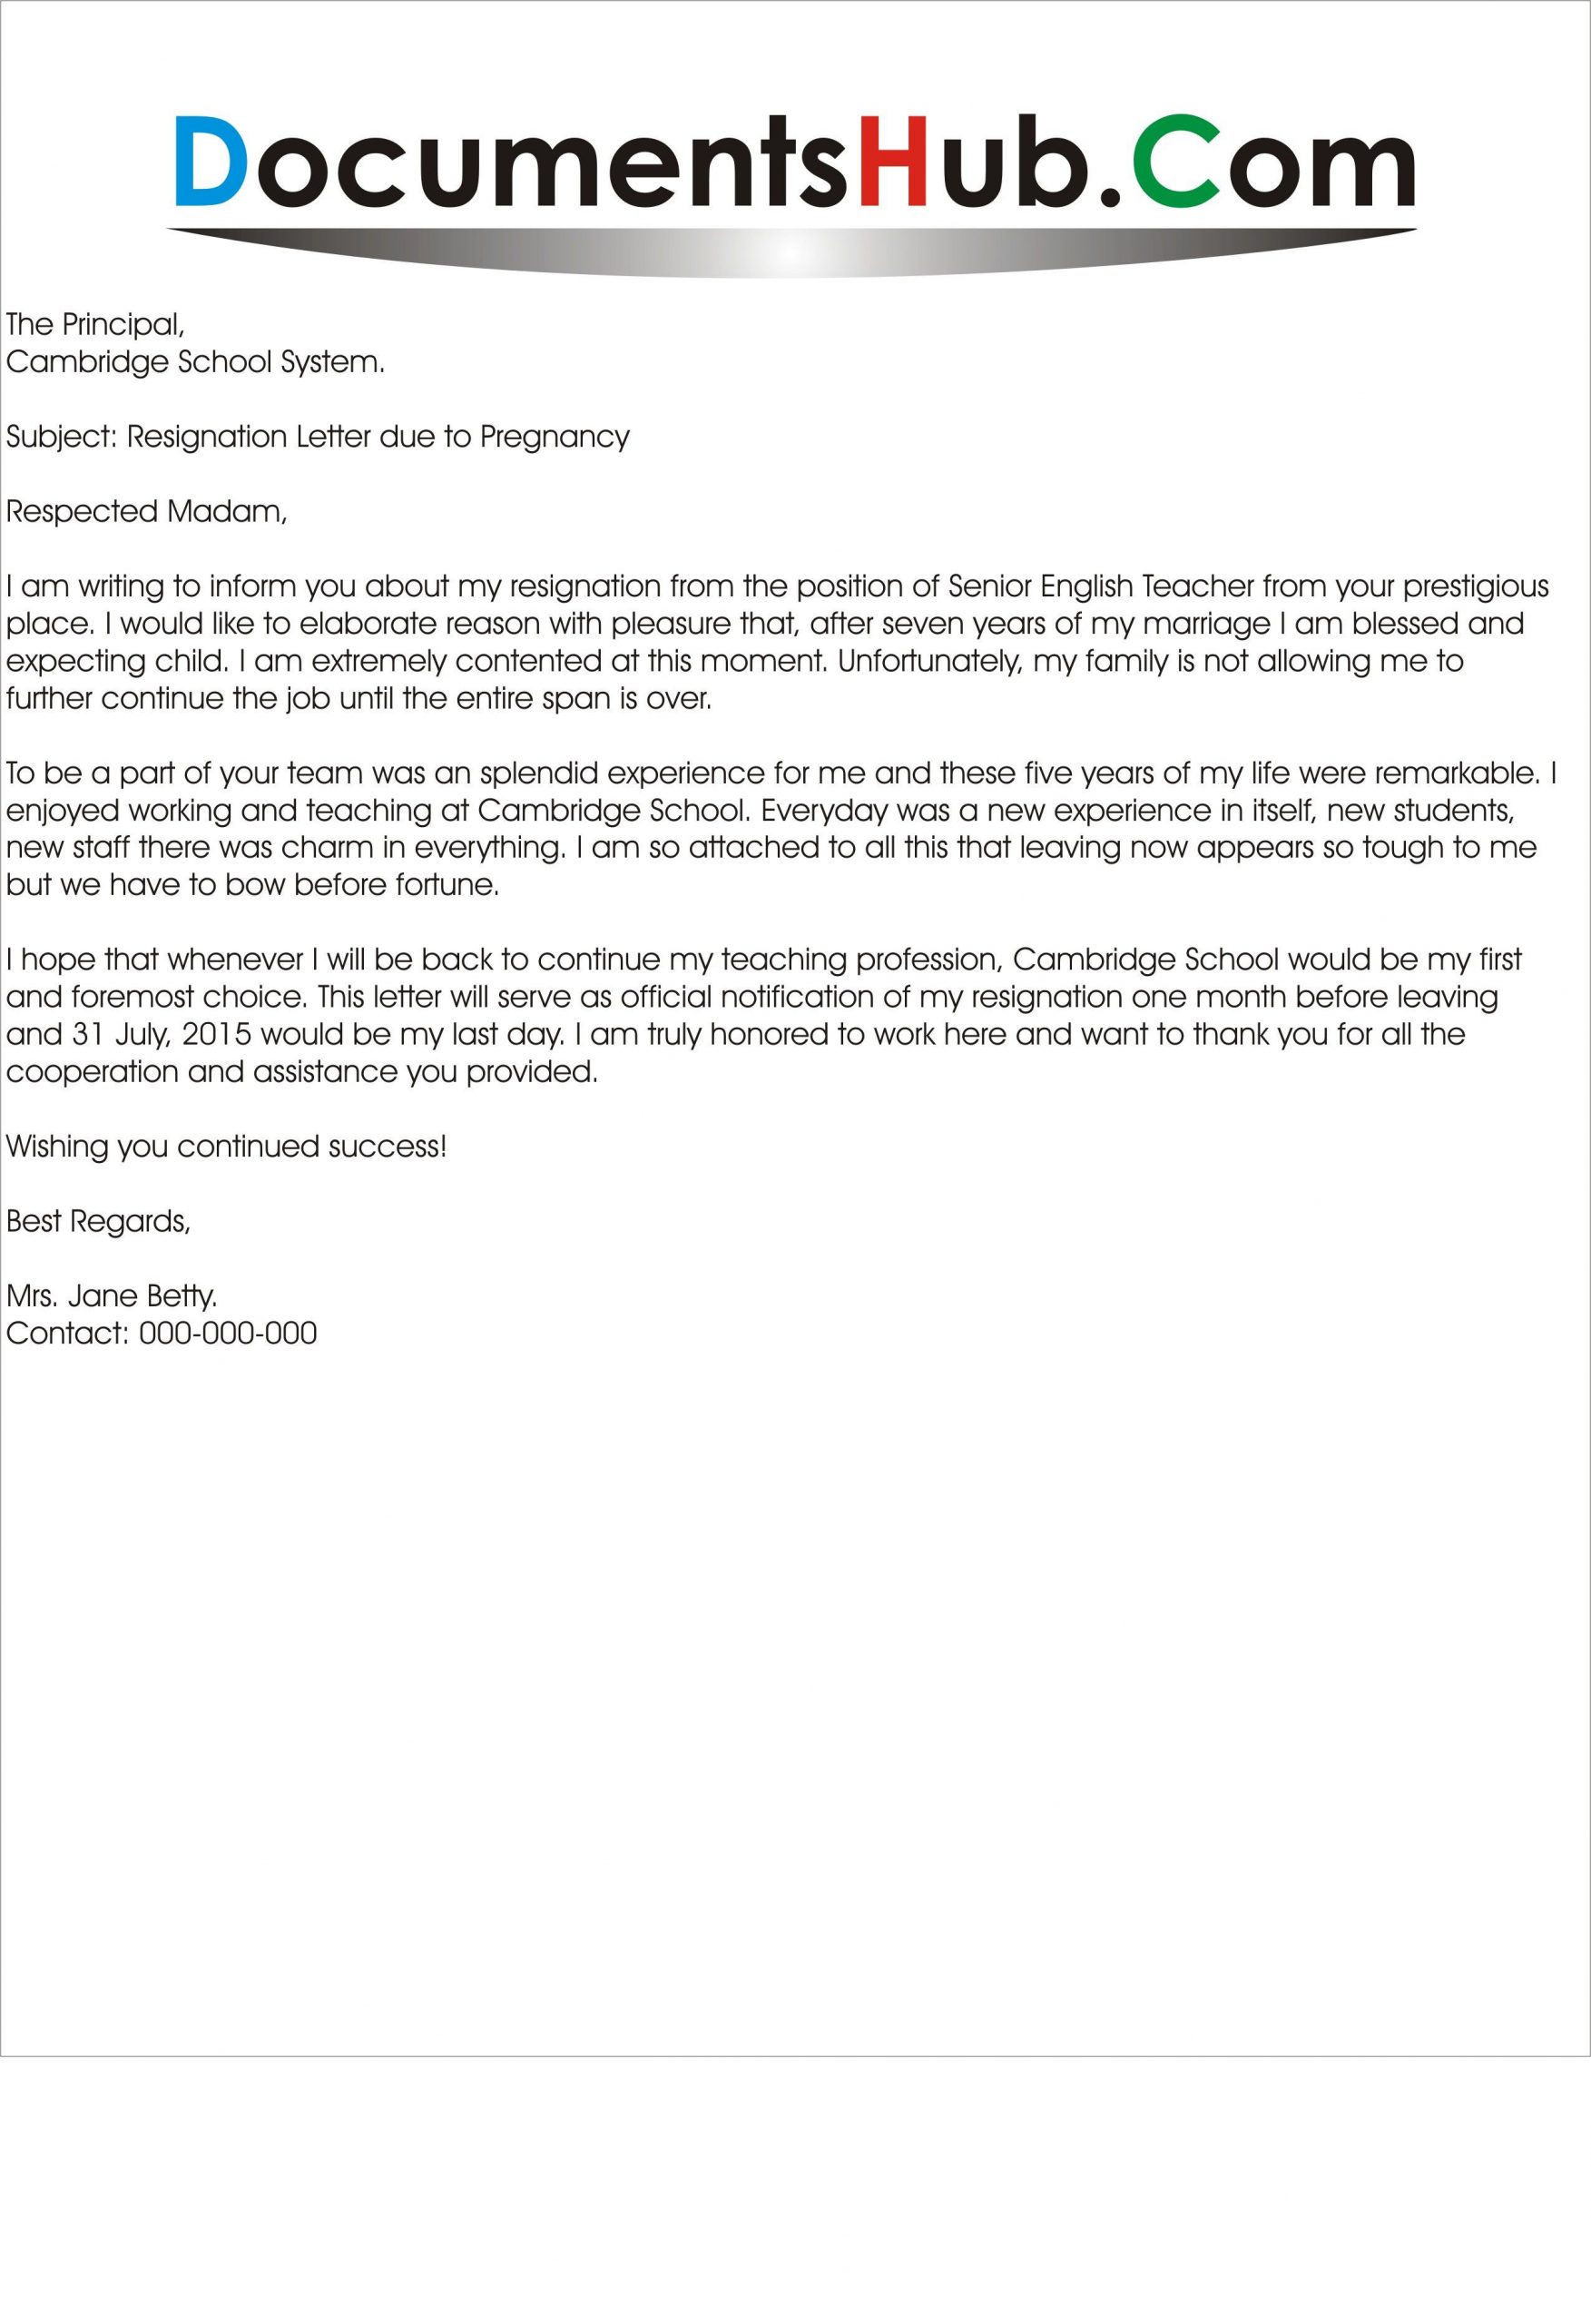 Sample Letter to Resume Work after Leave Best Refrence New Resignation Letter From Maternity Leave by …